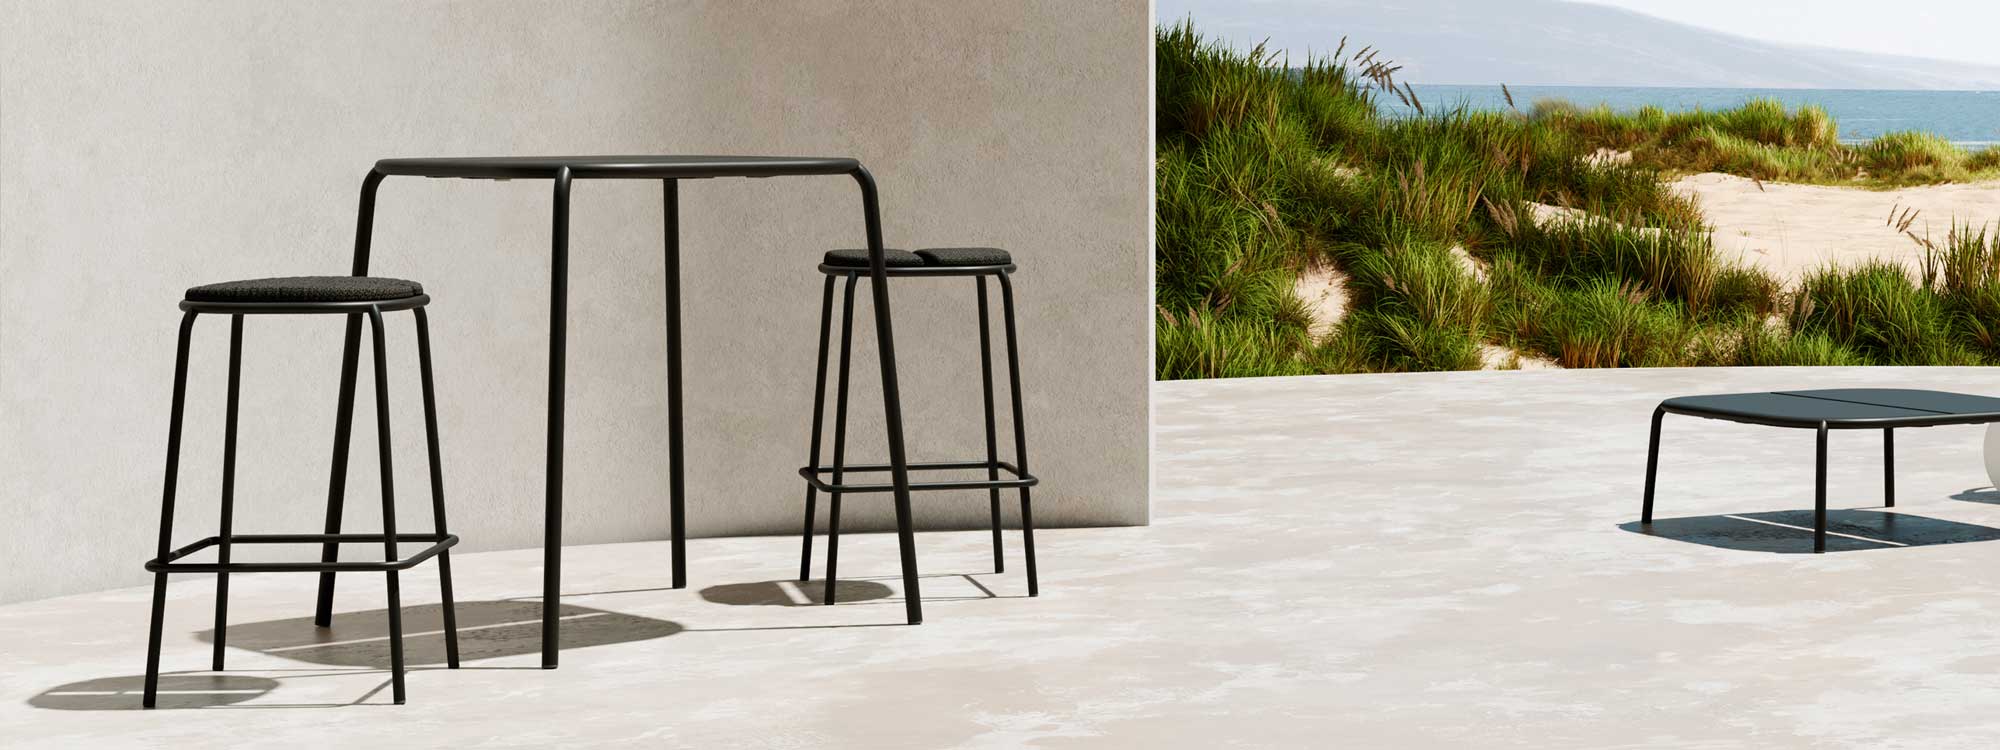 Image of Oiside Parc stacking poseur table and bar stools on sunny terrace with sand dunes and sea in the background